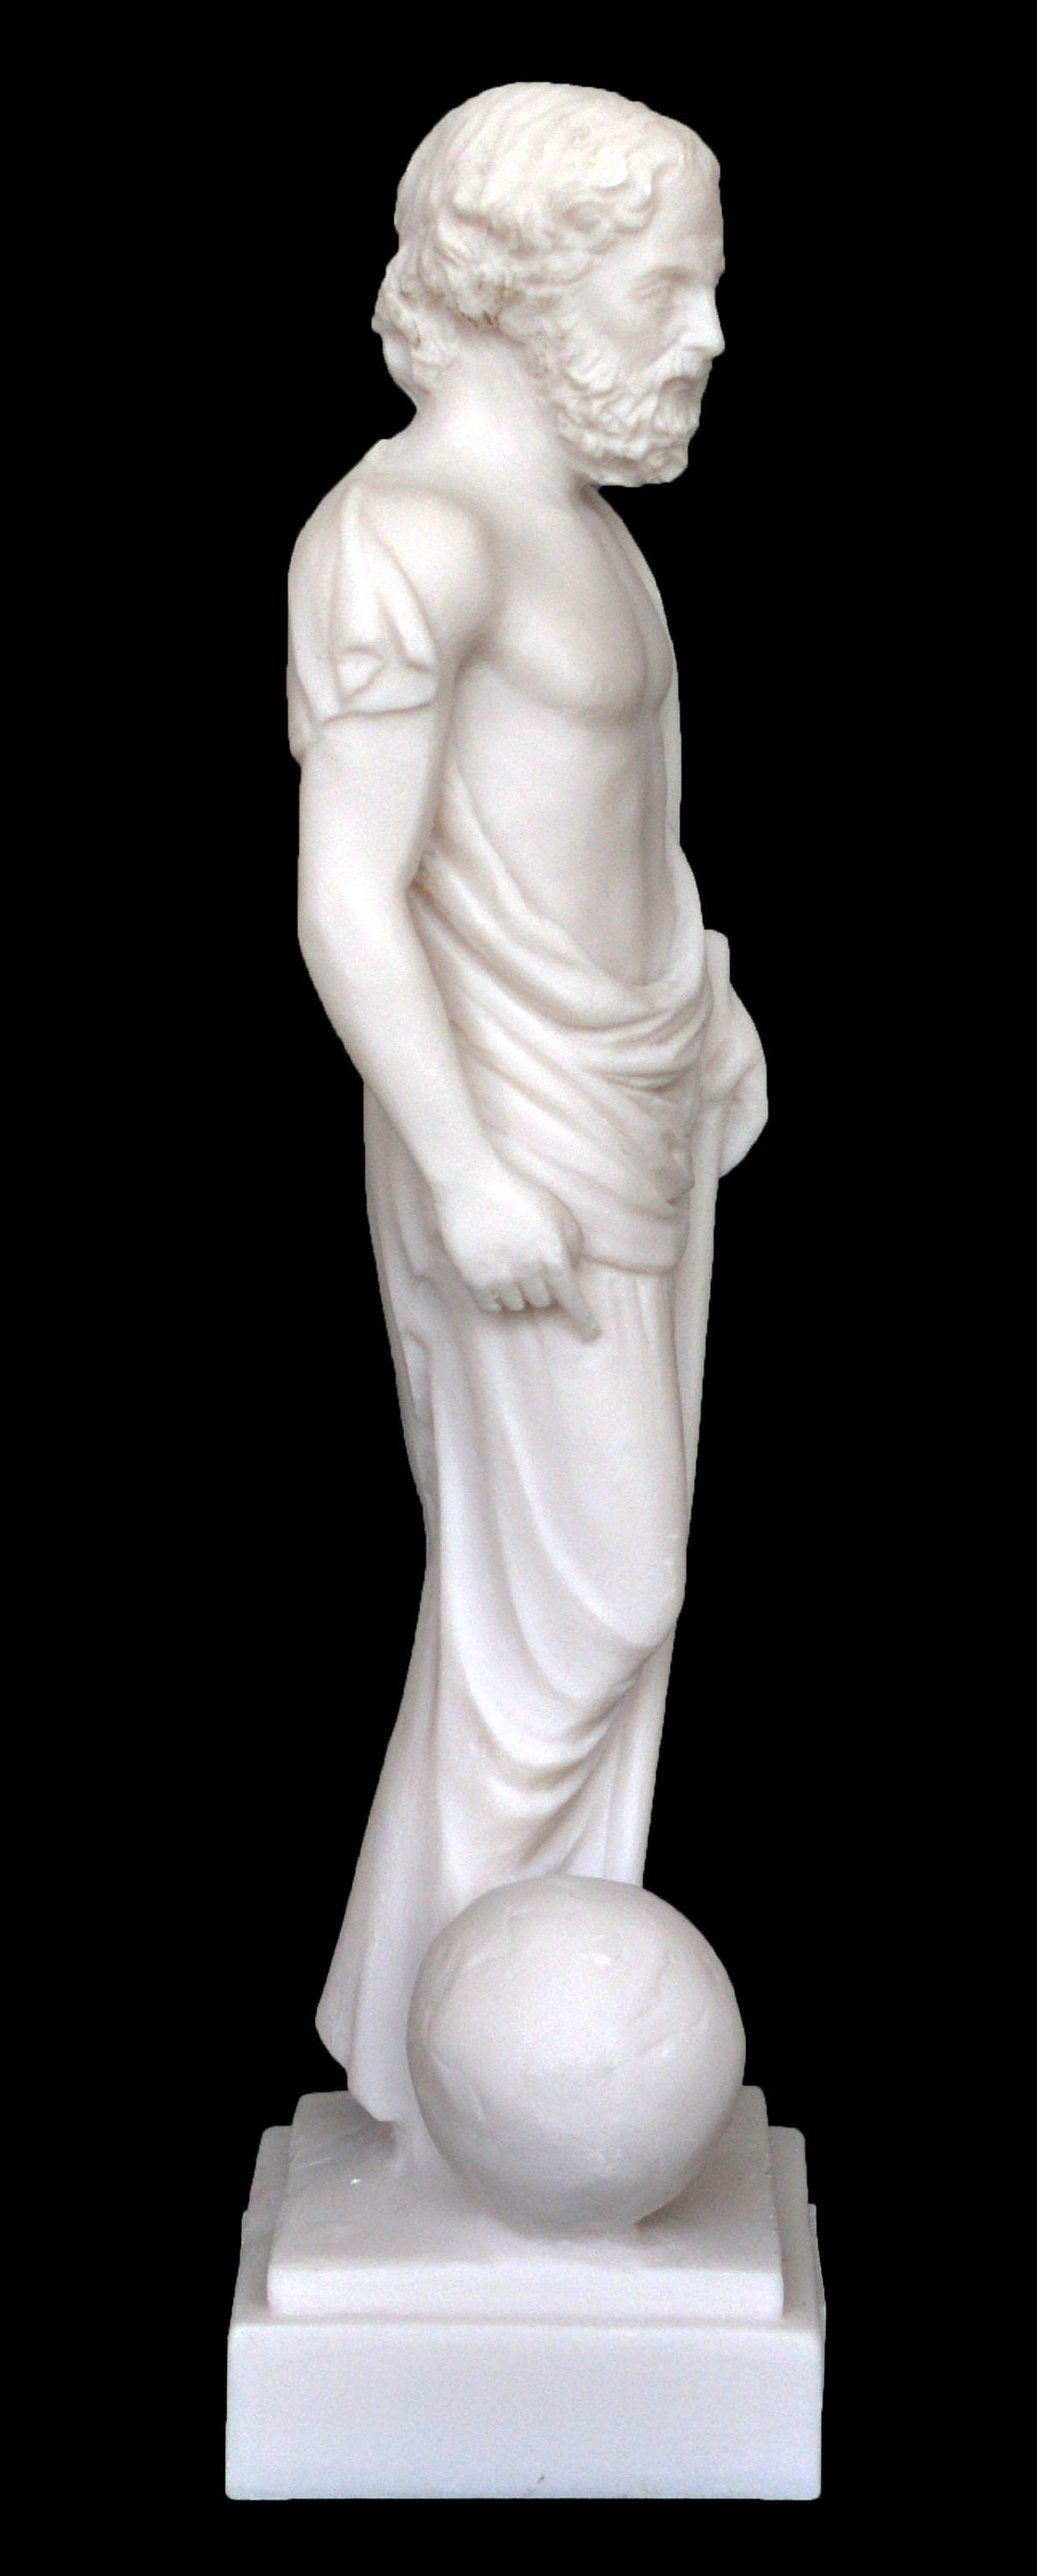 Archimedes of Syracuse - 287– 212 BC - Greek Mathematician, Physicist, Engineer, Astronomer, and Inventor  - Alabaster Statue